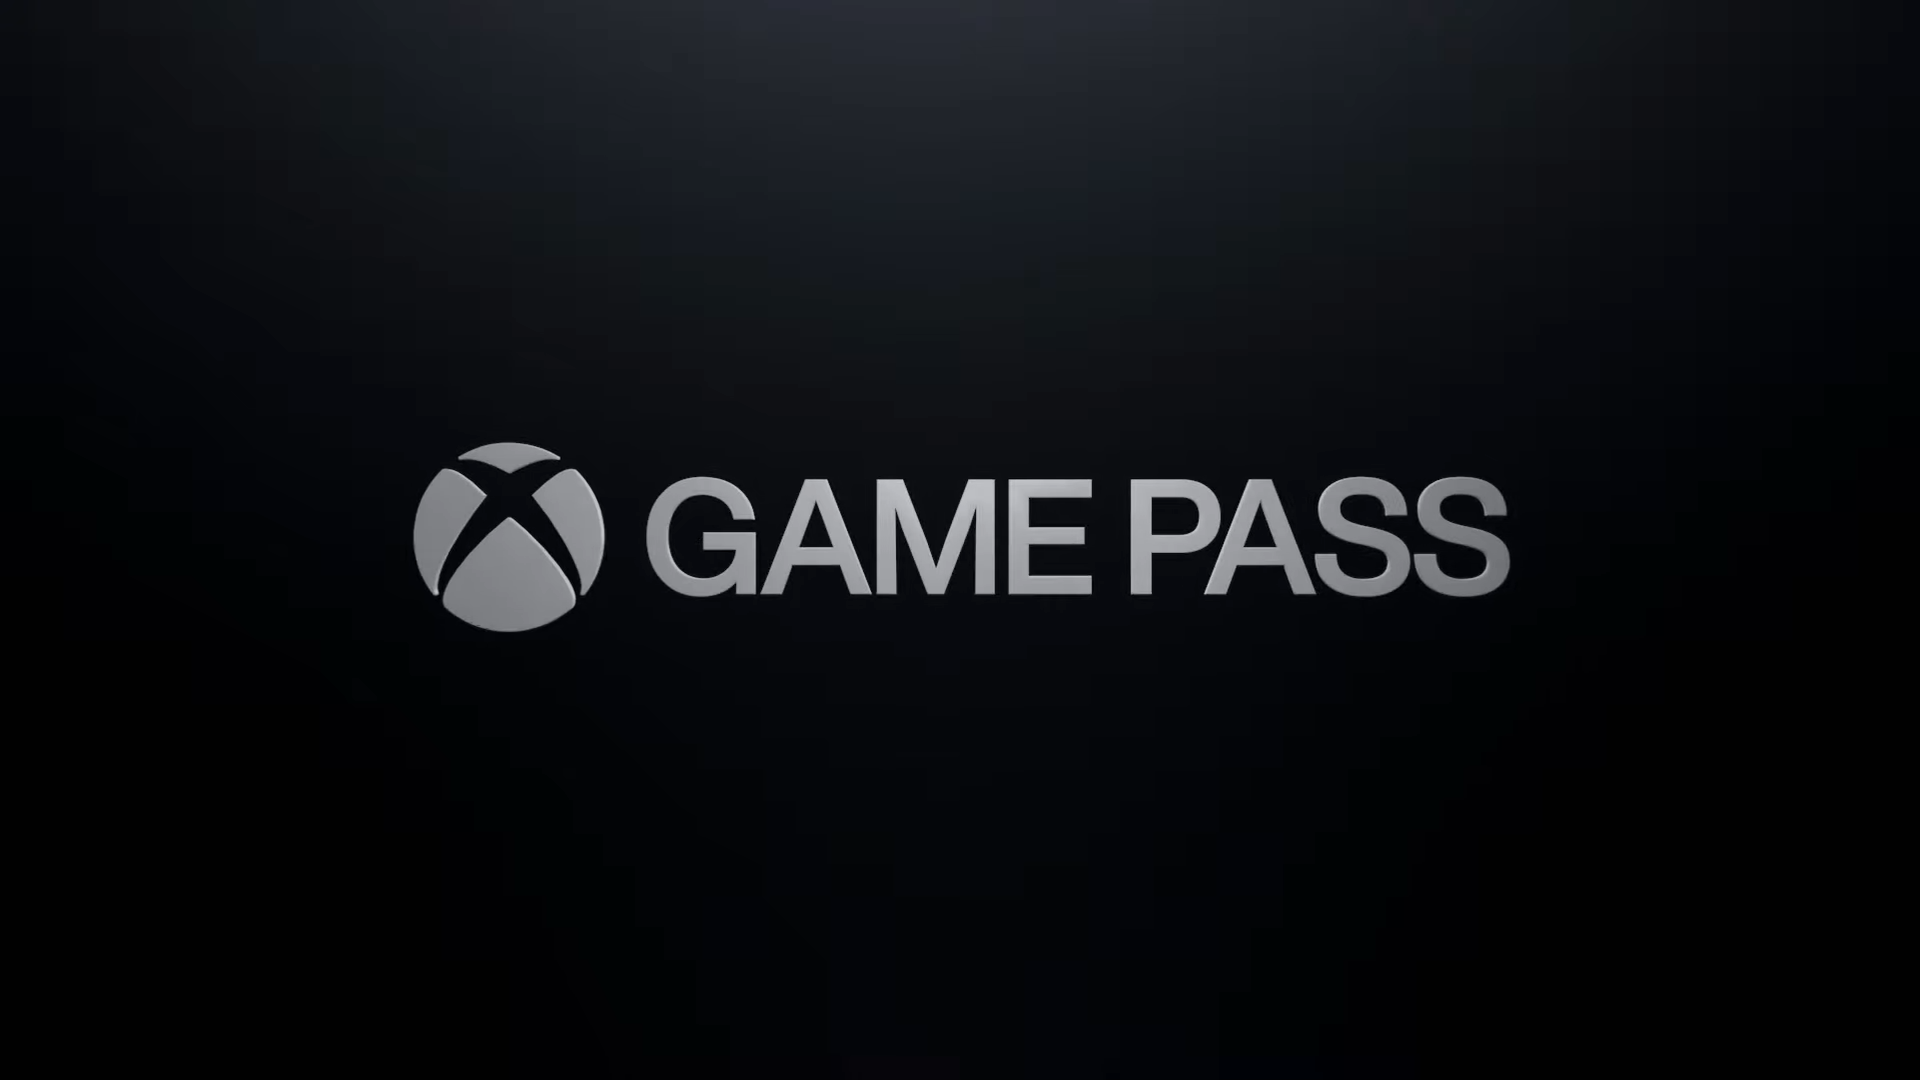 download xbox game pass